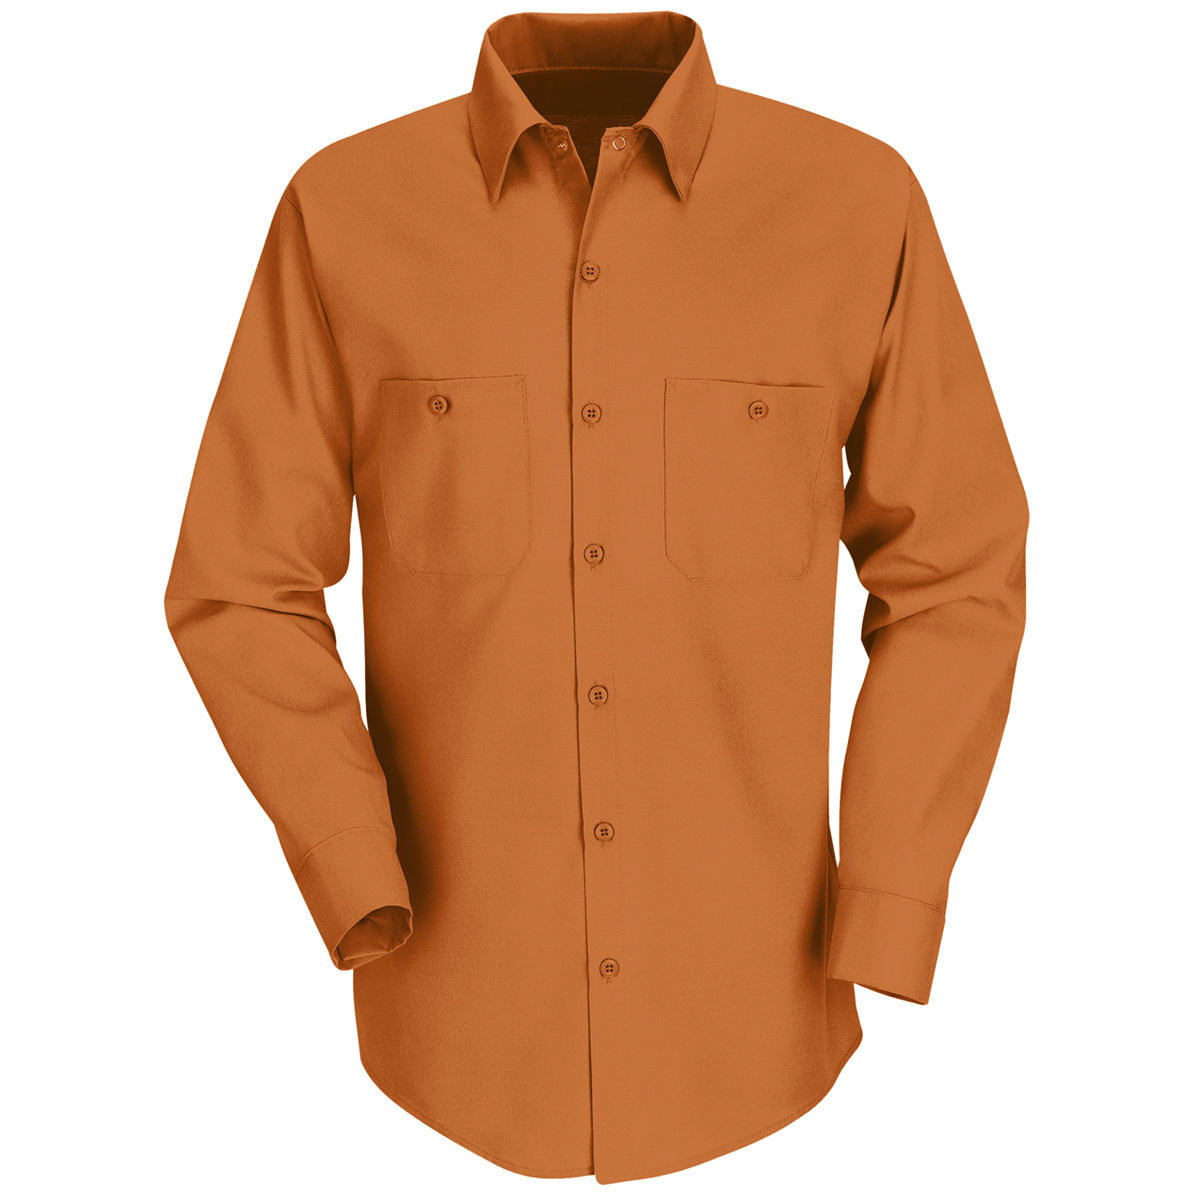 Bulwark® 3X Tall Orange Polyester/Cotton Flame Resistant Work Shirt With Button Front Closure